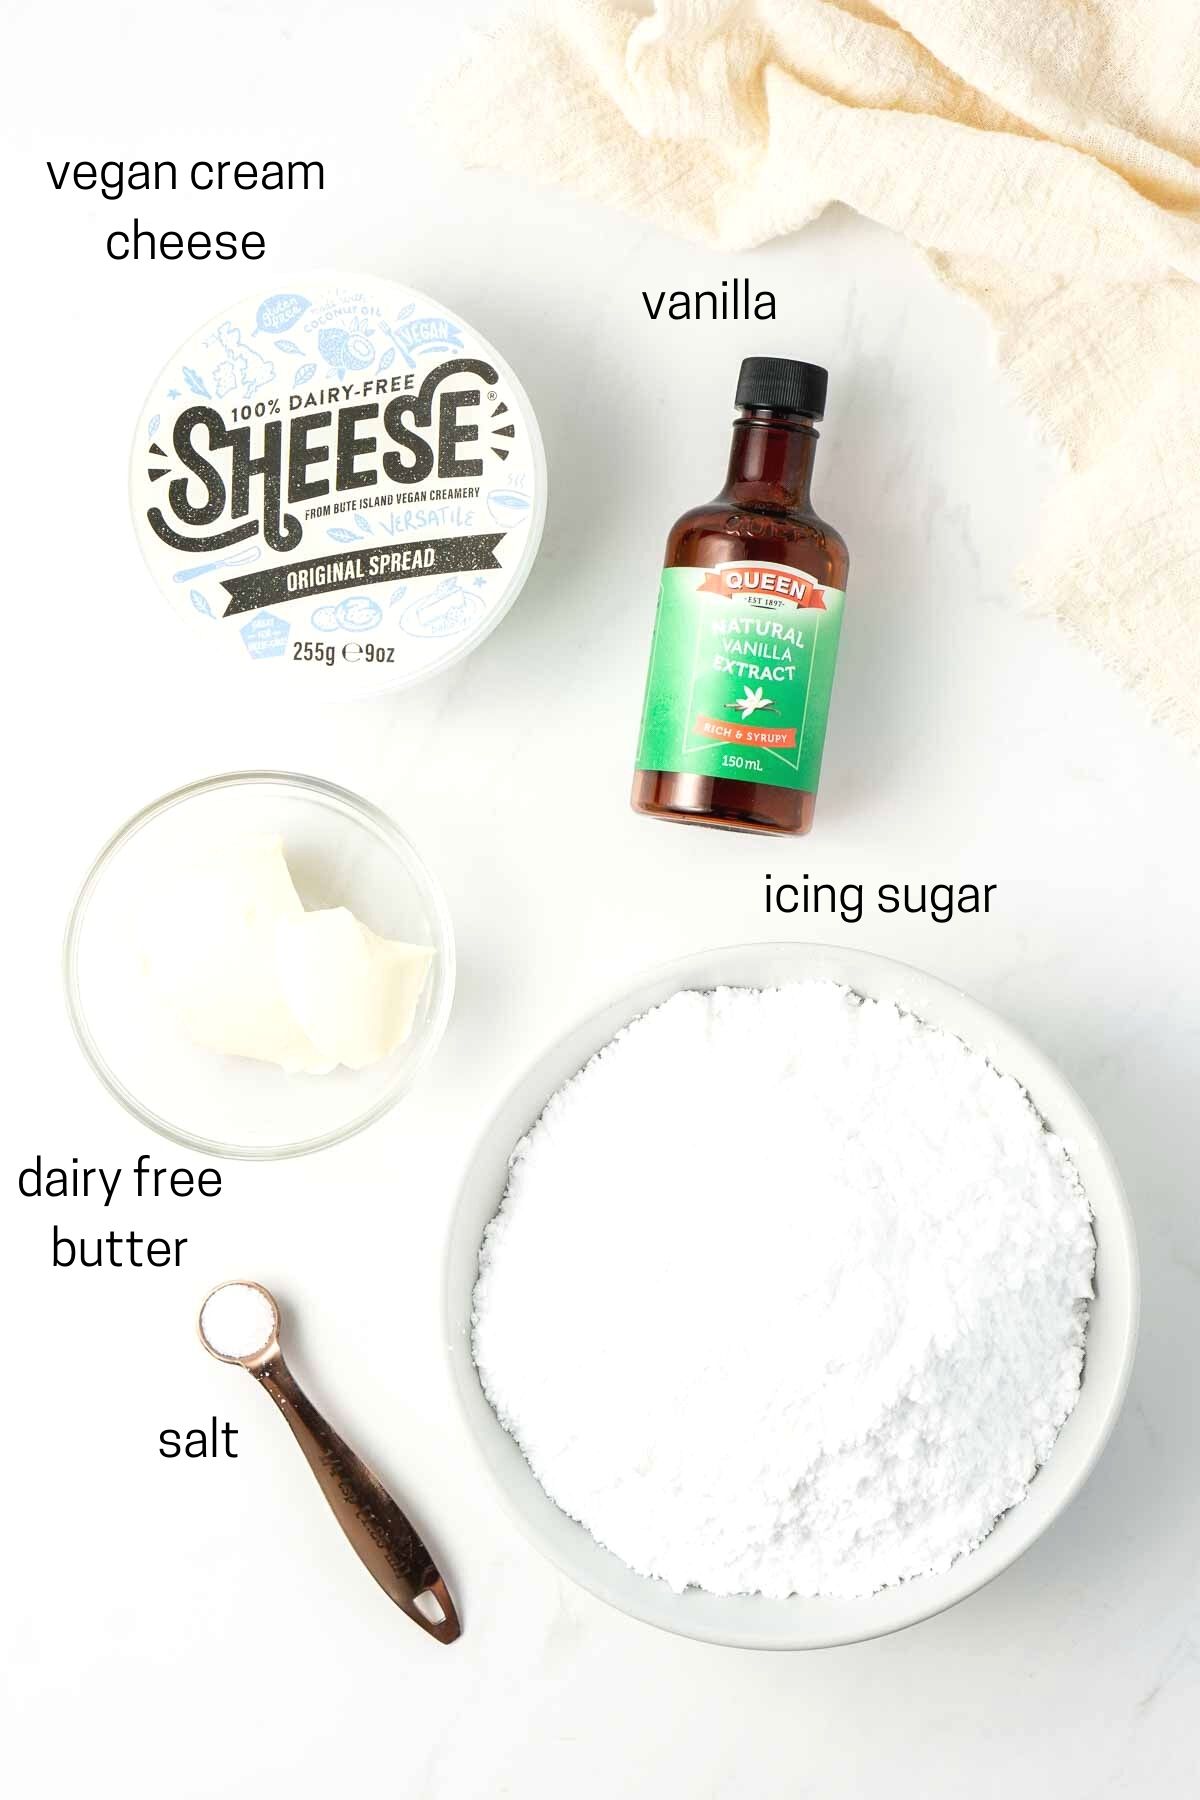 All ingredients needed for vegan cream cheese frosting laid out.